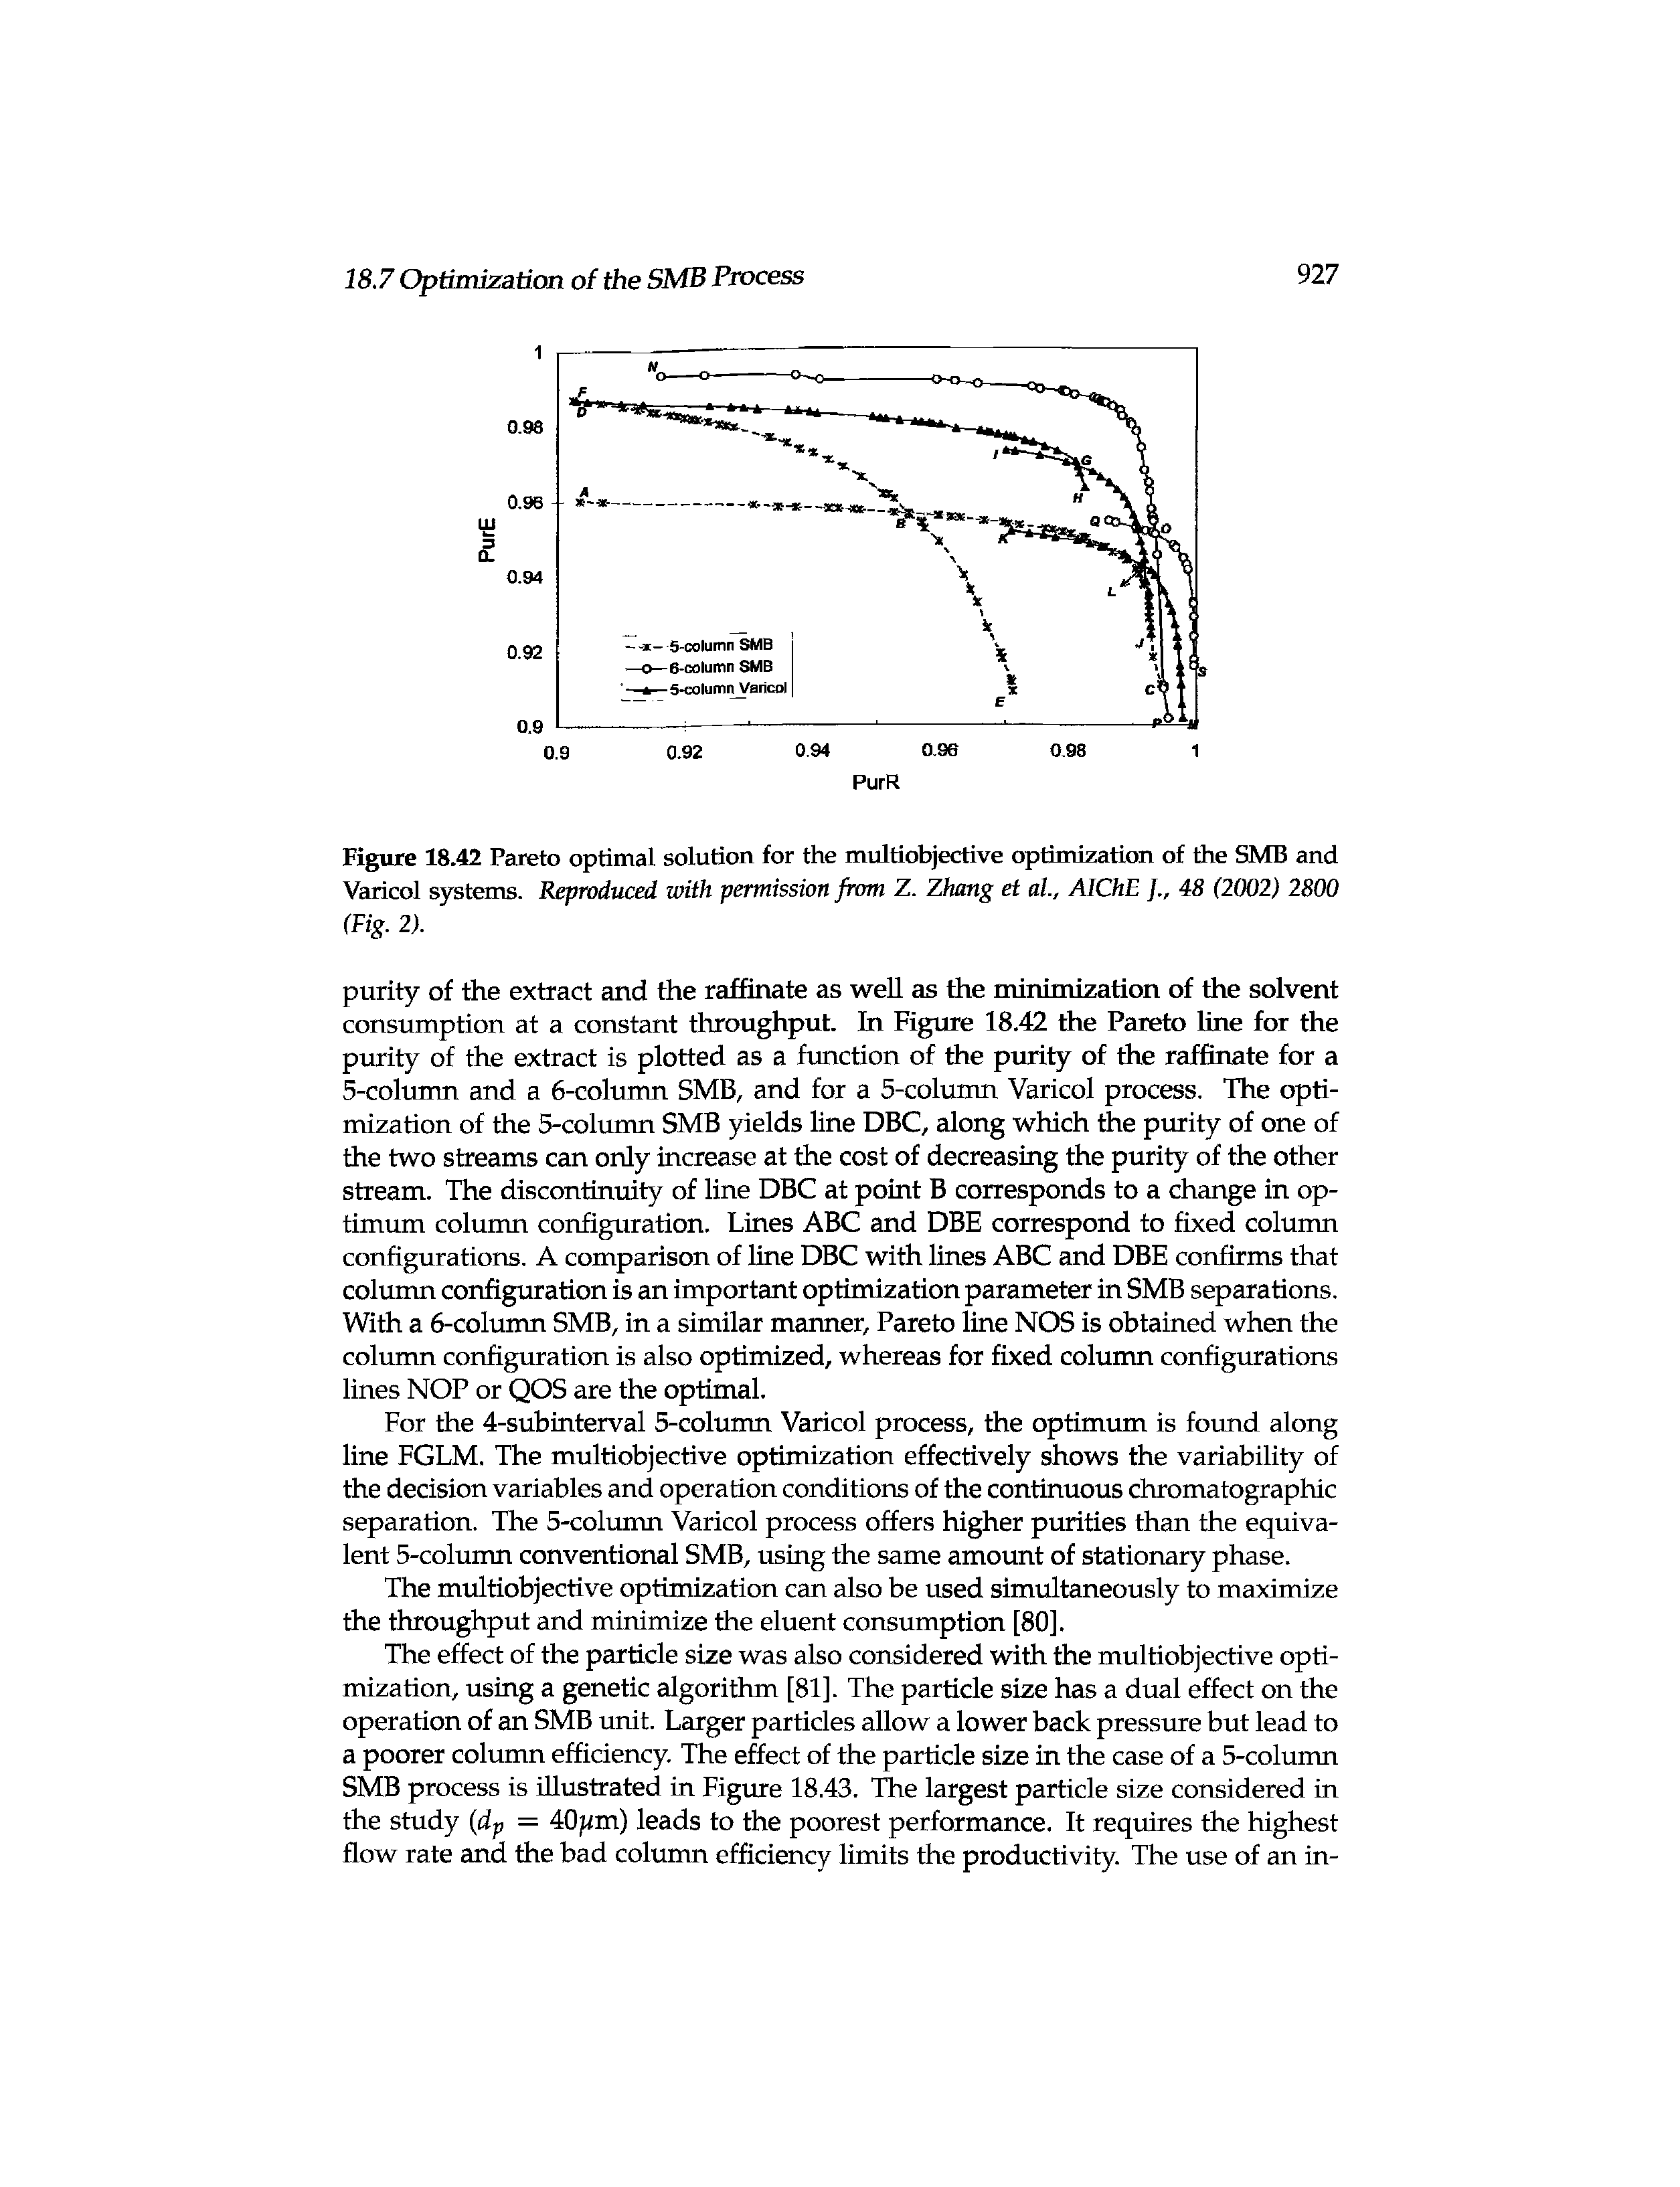 Figure 18.42 Pareto optimal solution for the multiobjective optimization of the SMB and Varicol systems. Reproduced with permission from Z. Zhang et al., AIChE 48 (2002) 2800 (Fig. 2).